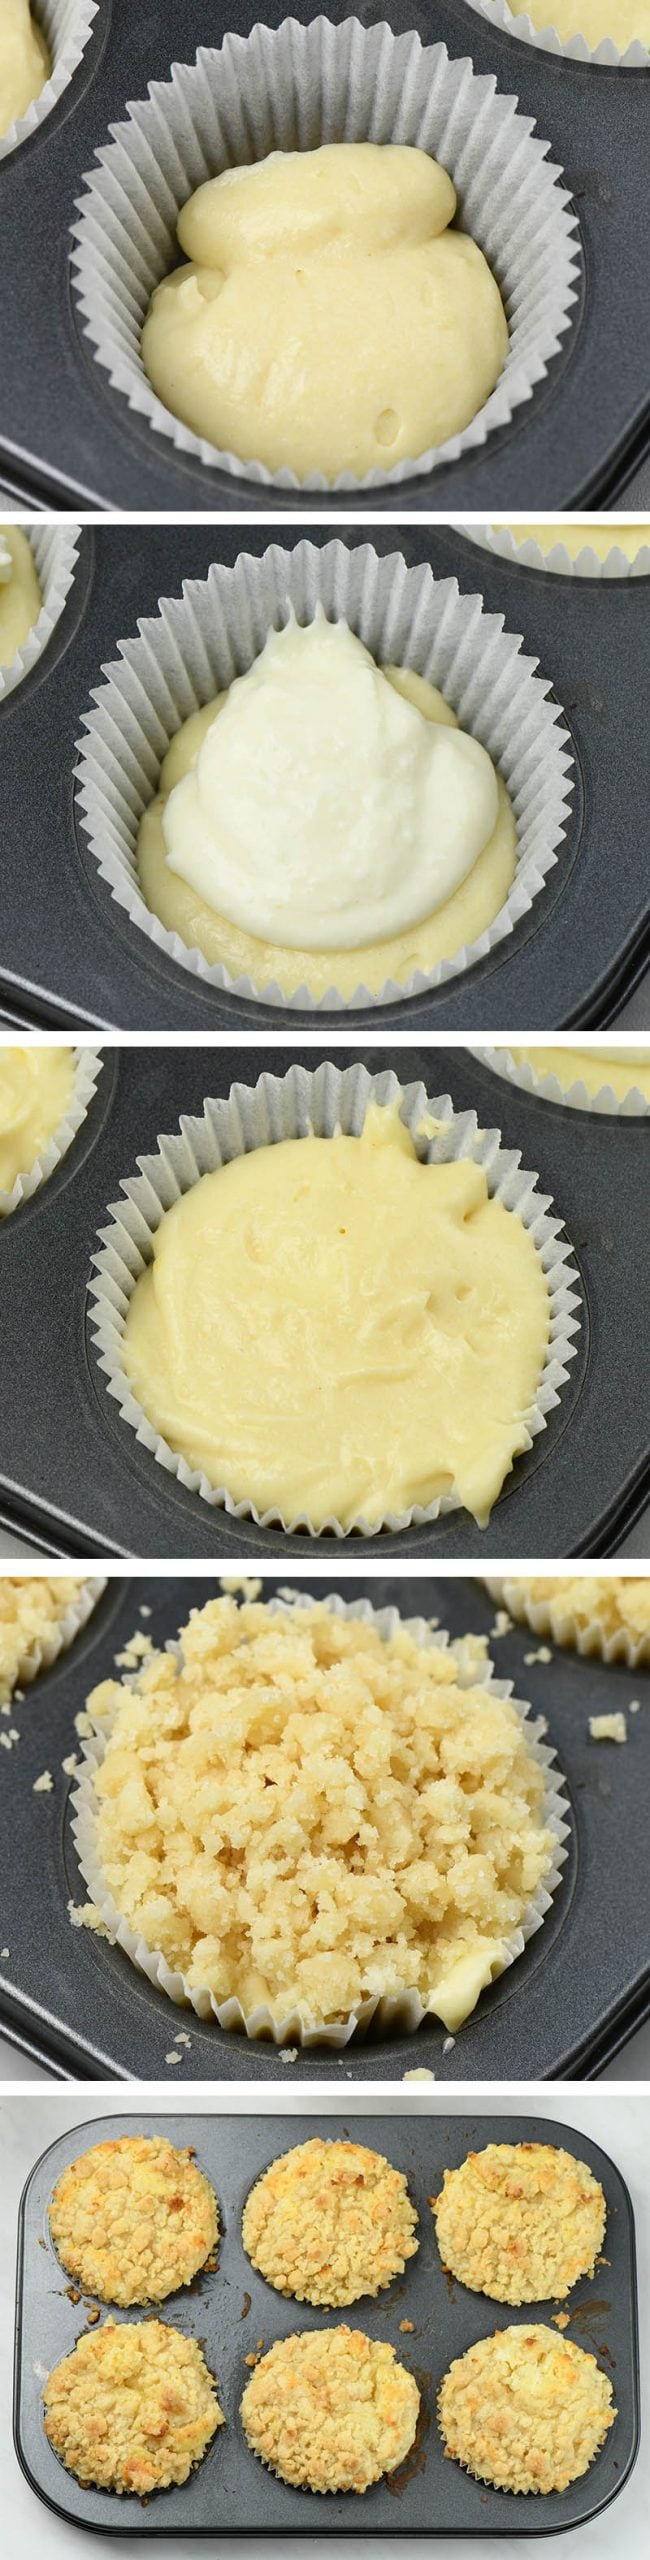 Couple of images of step-b-step preparation of Lemon Muffins.